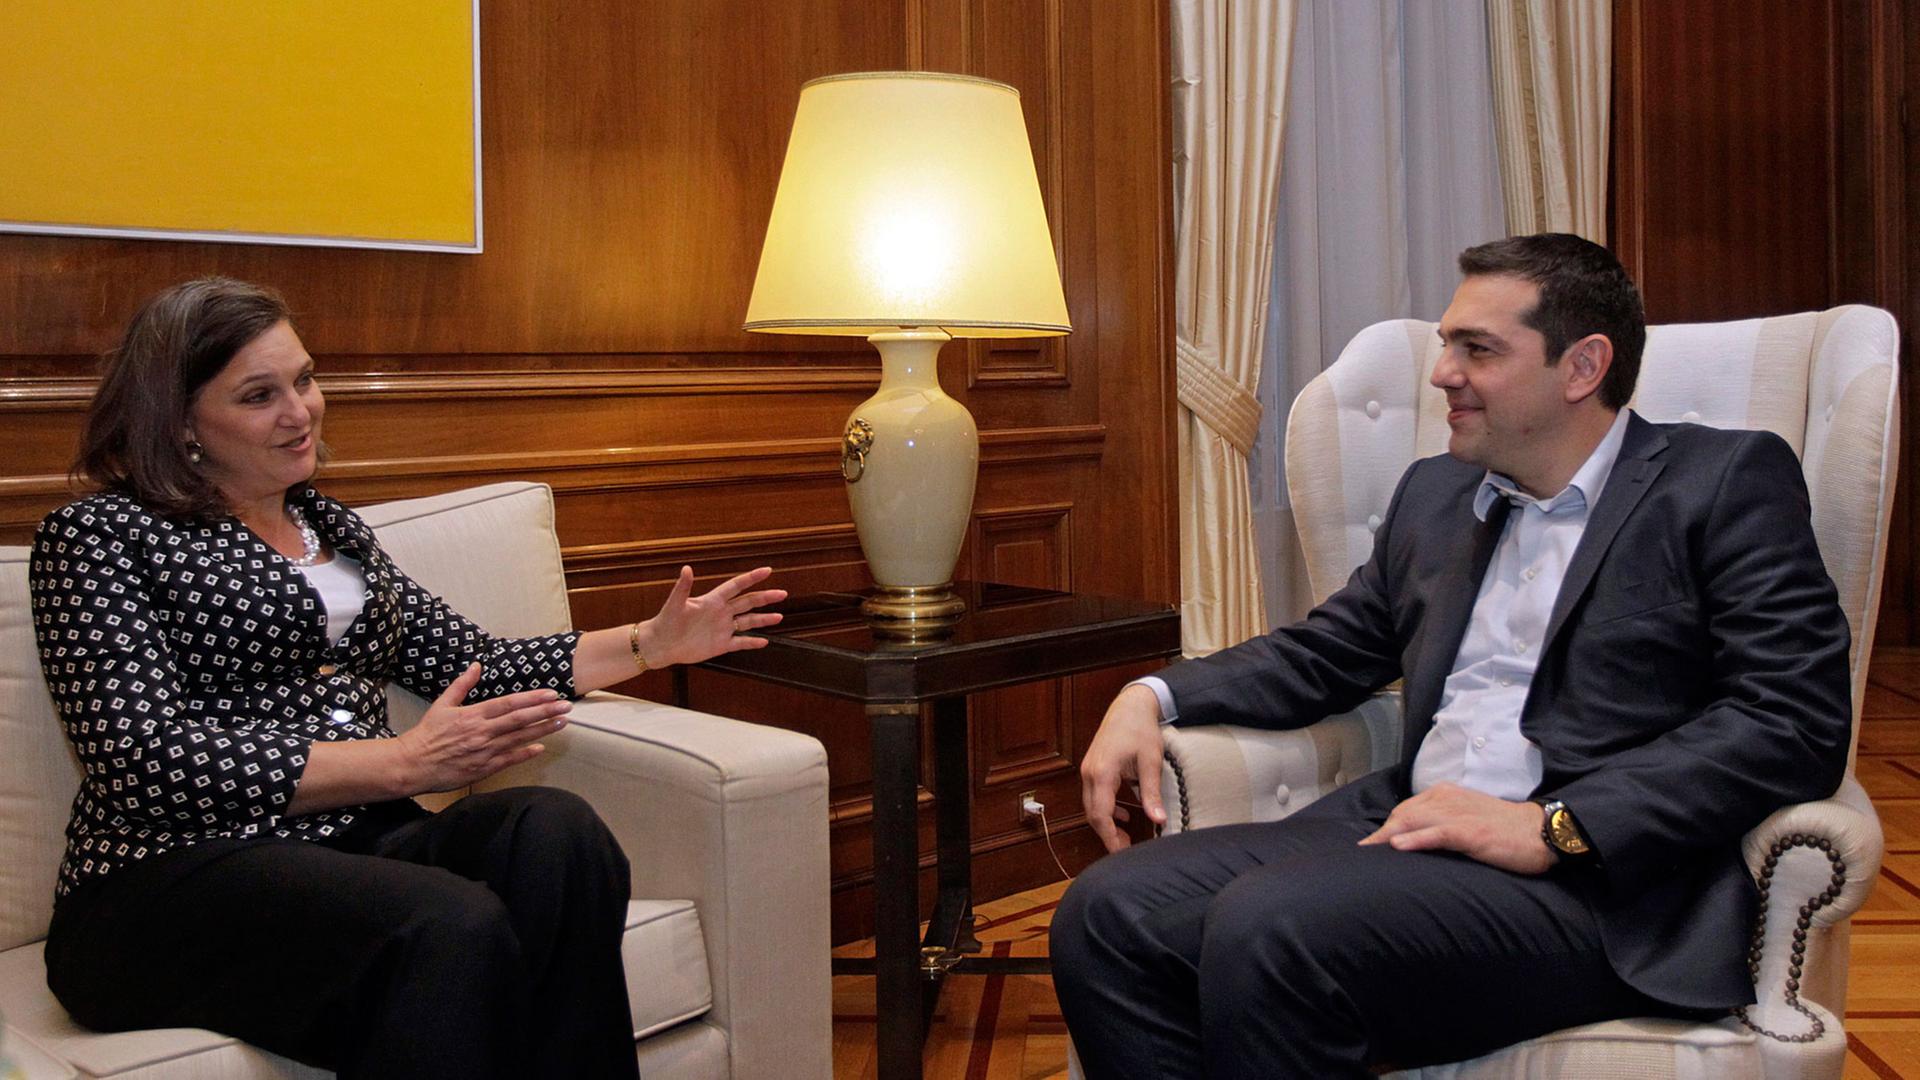 Greek Prime Minister Alexis Tsipras (R) talks with Victoria Nuland (L), Assistant Secretary of State for European and Eurasian Affairs at the United States Department of State, in Athens on 17 March 2015. Victoria Nuland is in Athens on one-day working visit.